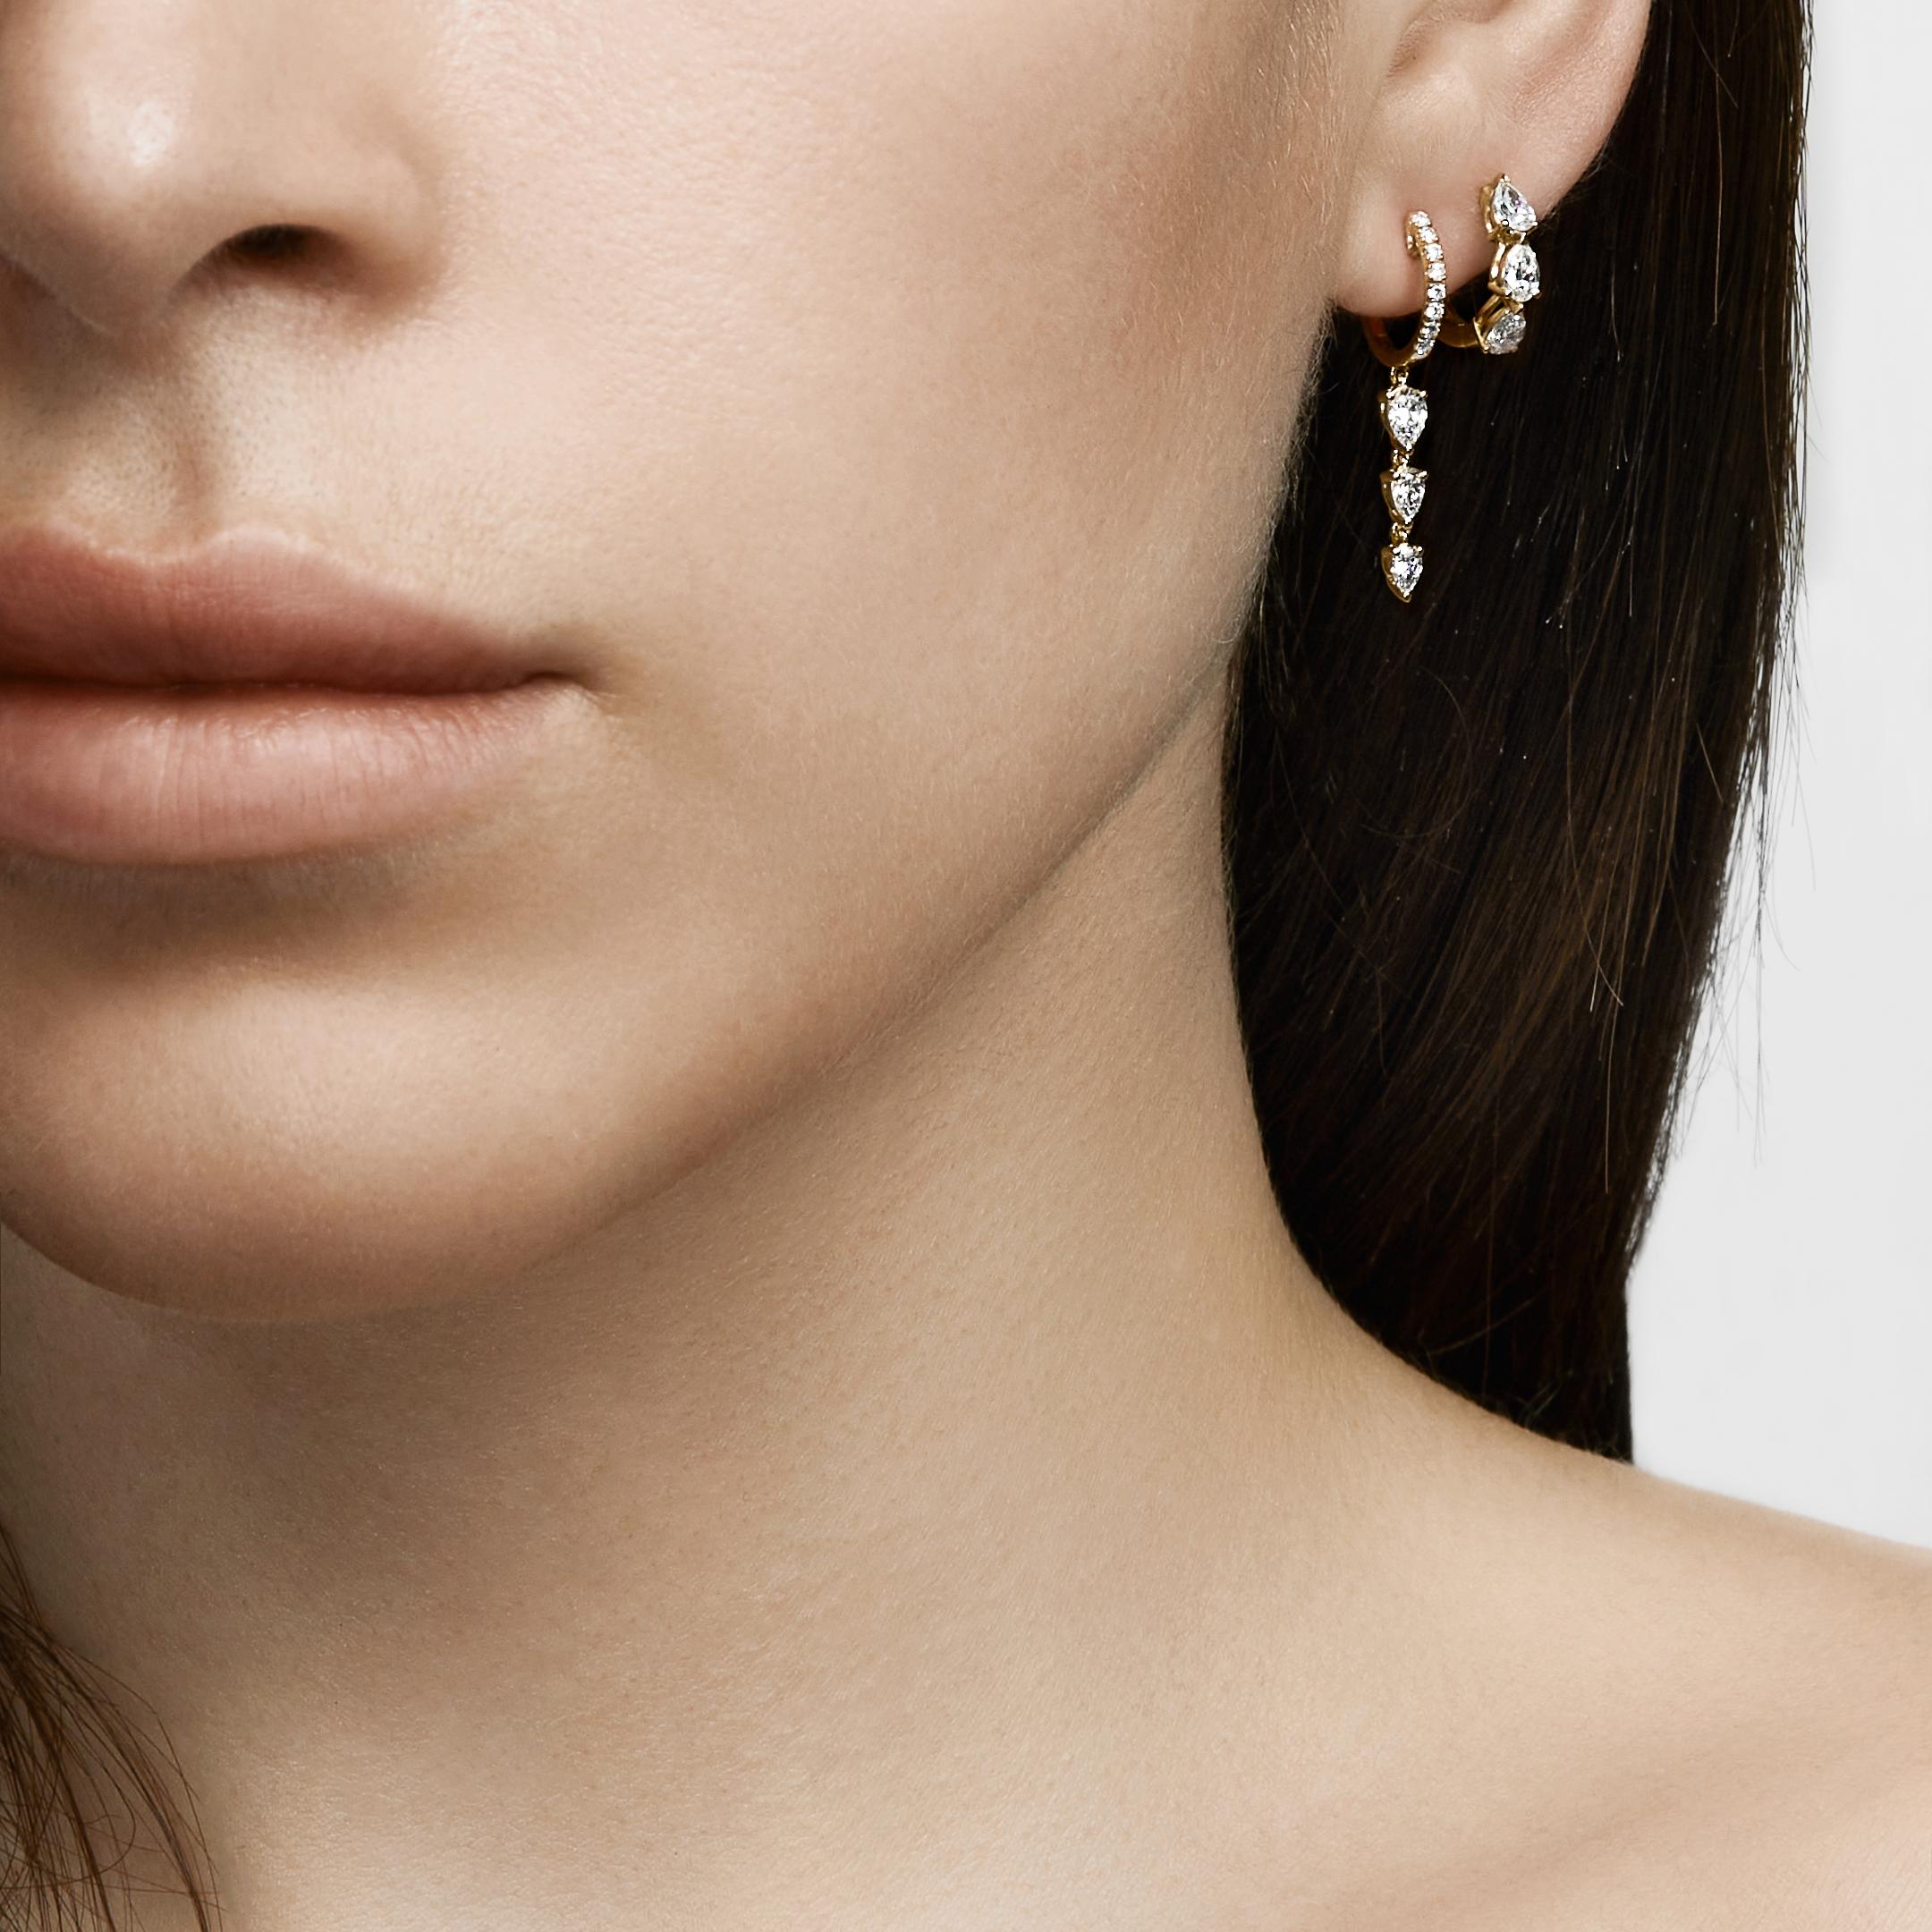 Everyone needs a perfect diamond hoop earring to take them from the office to dinner plans to weekend brunch with friends. The Pear-Shaped Diamond Huggies are just that versatile fine jewelry staple. Crafted in 18-karat yellow gold, these huggie